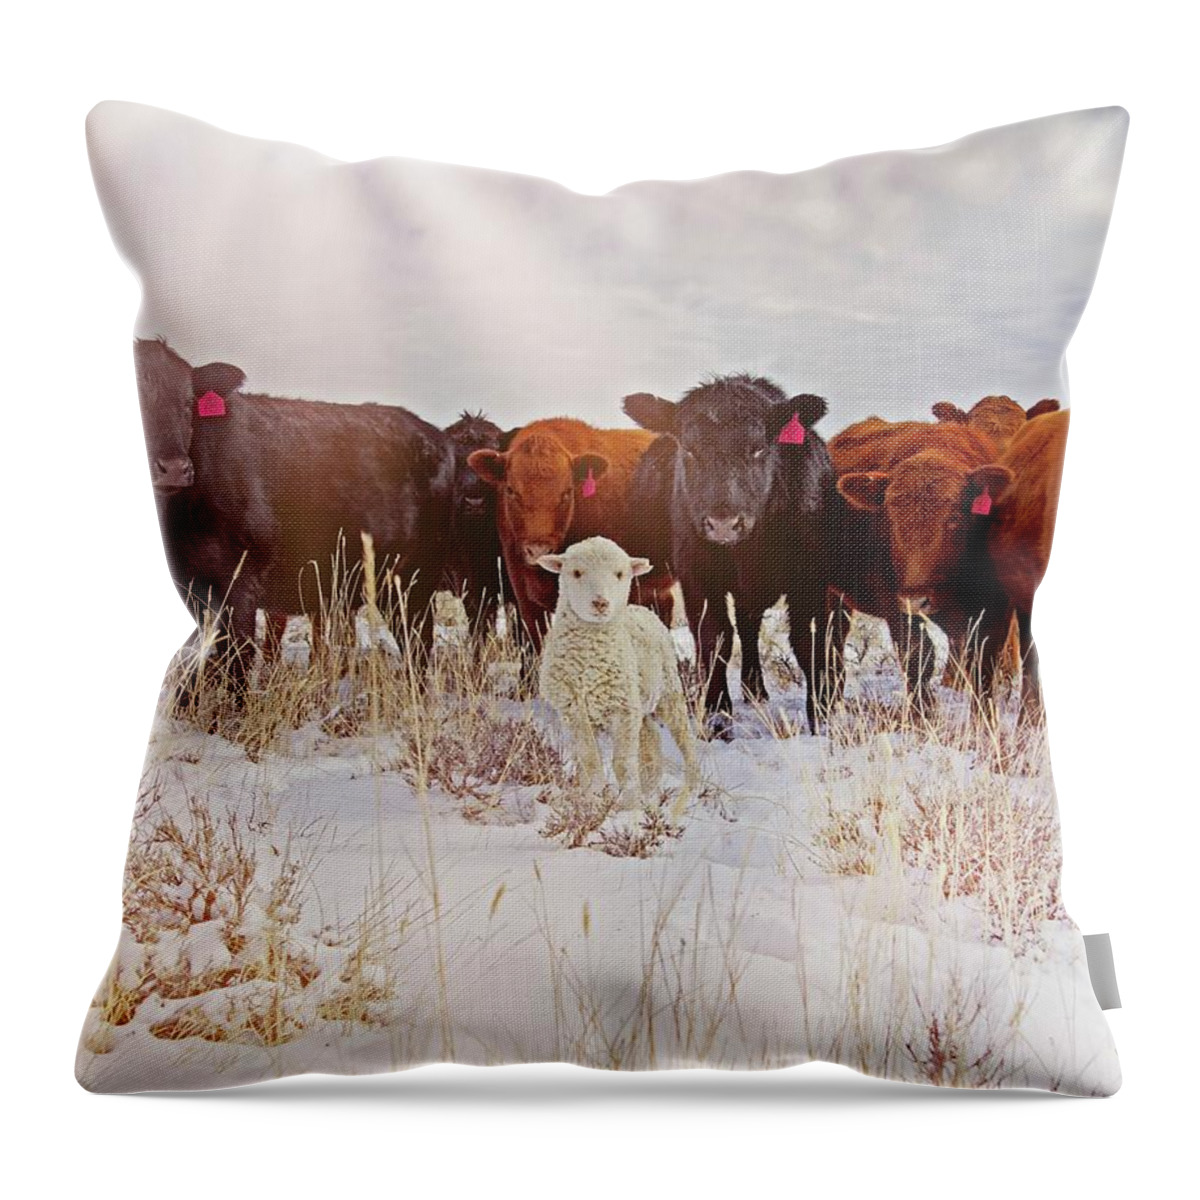 Cattle Throw Pillow featuring the photograph Behold by Amanda Smith